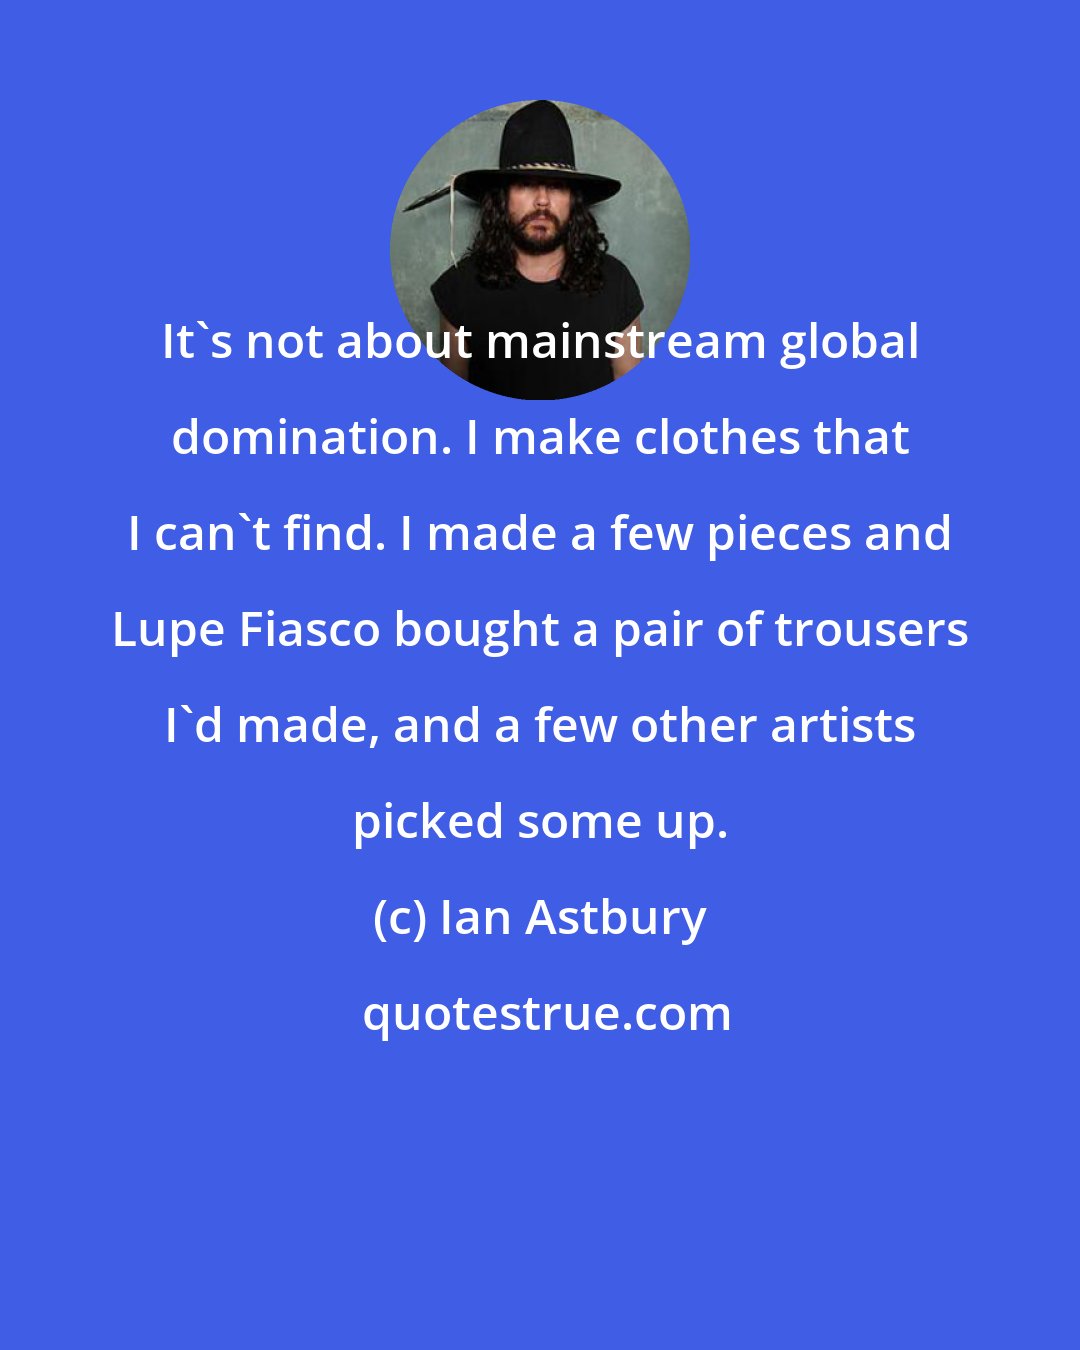 Ian Astbury: It's not about mainstream global domination. I make clothes that I can't find. I made a few pieces and Lupe Fiasco bought a pair of trousers I'd made, and a few other artists picked some up.